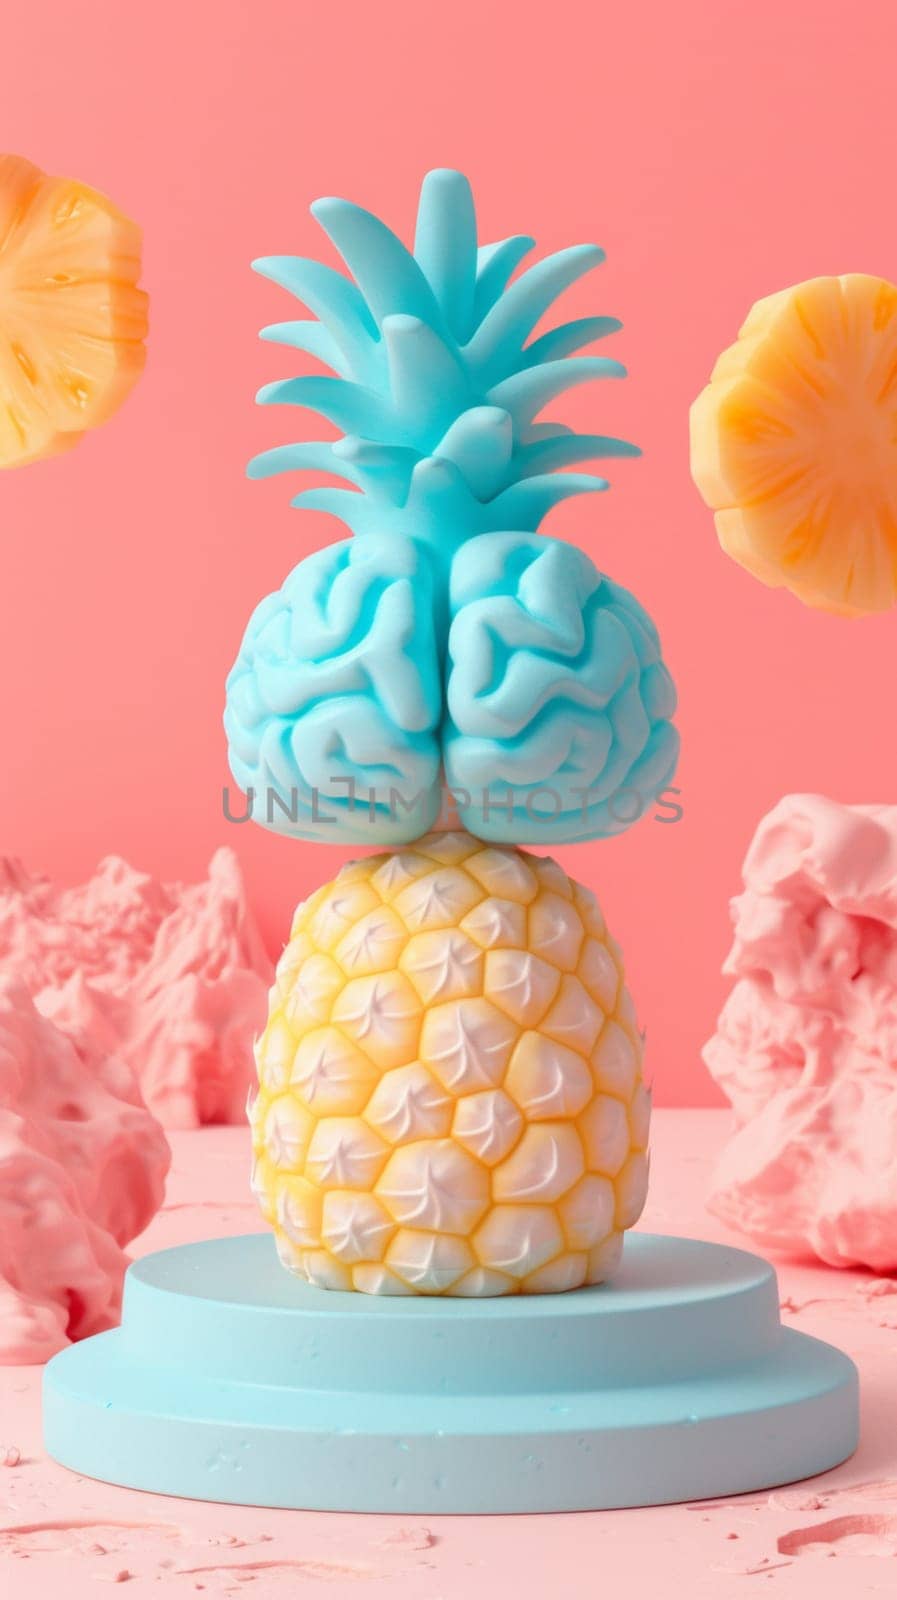 A pineapple with a brain on top of it and some other fruit